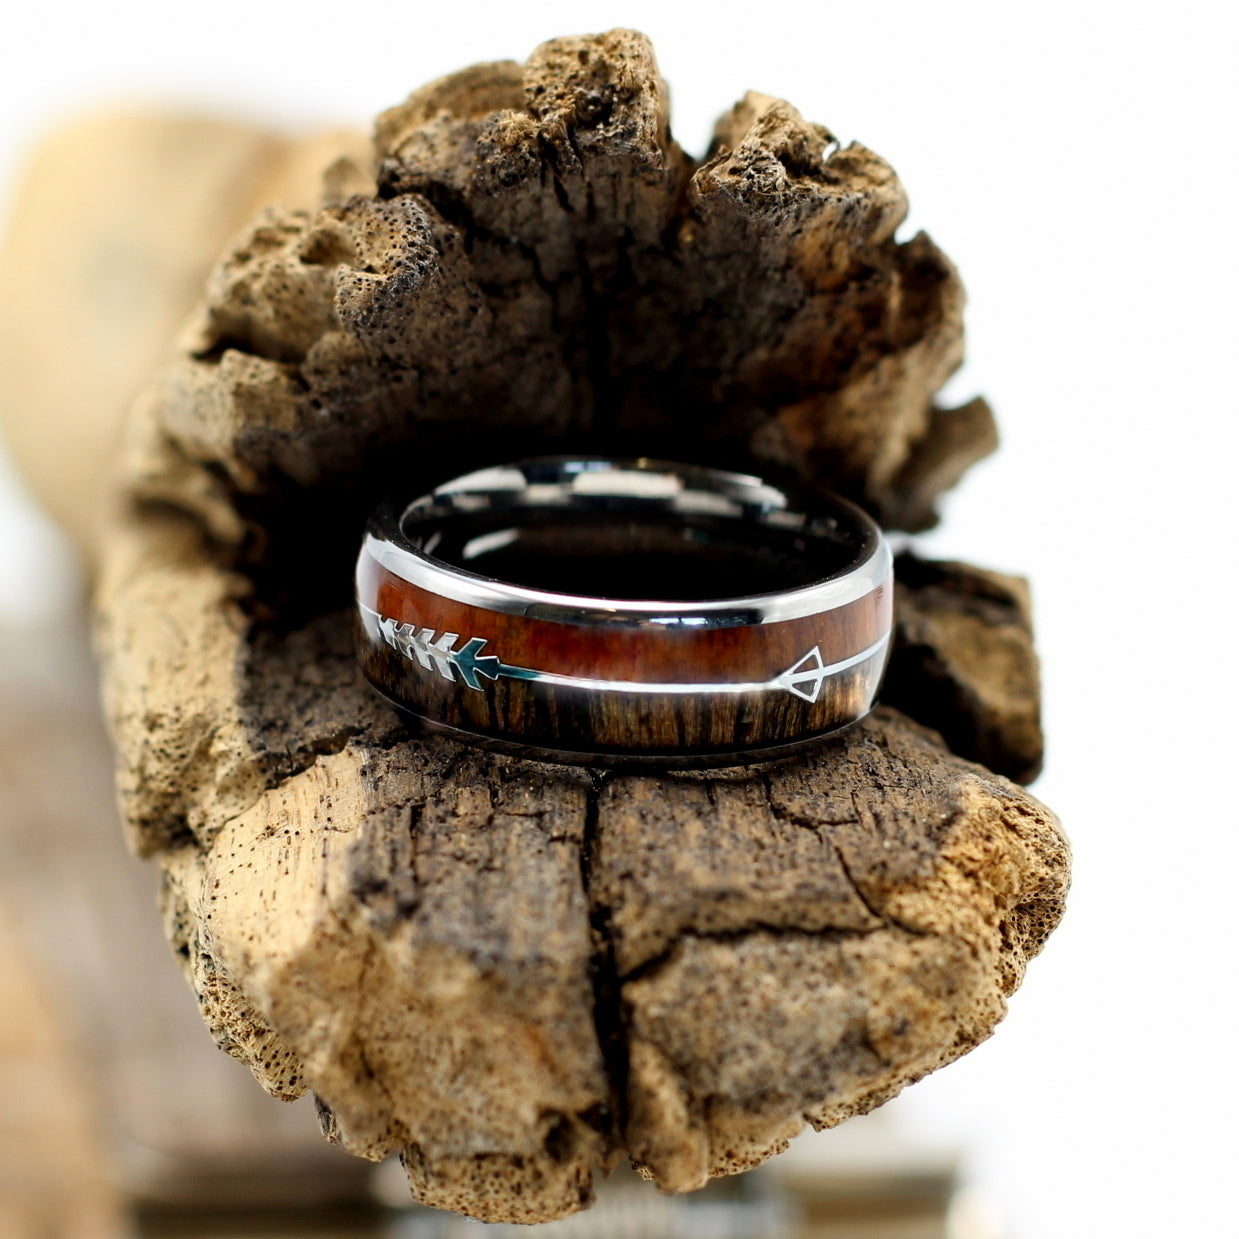 Men's silver tungsten ring arrow insert double koa wood inlay, 8mm band, wedding rings, warrior, engrave a message on the inside.